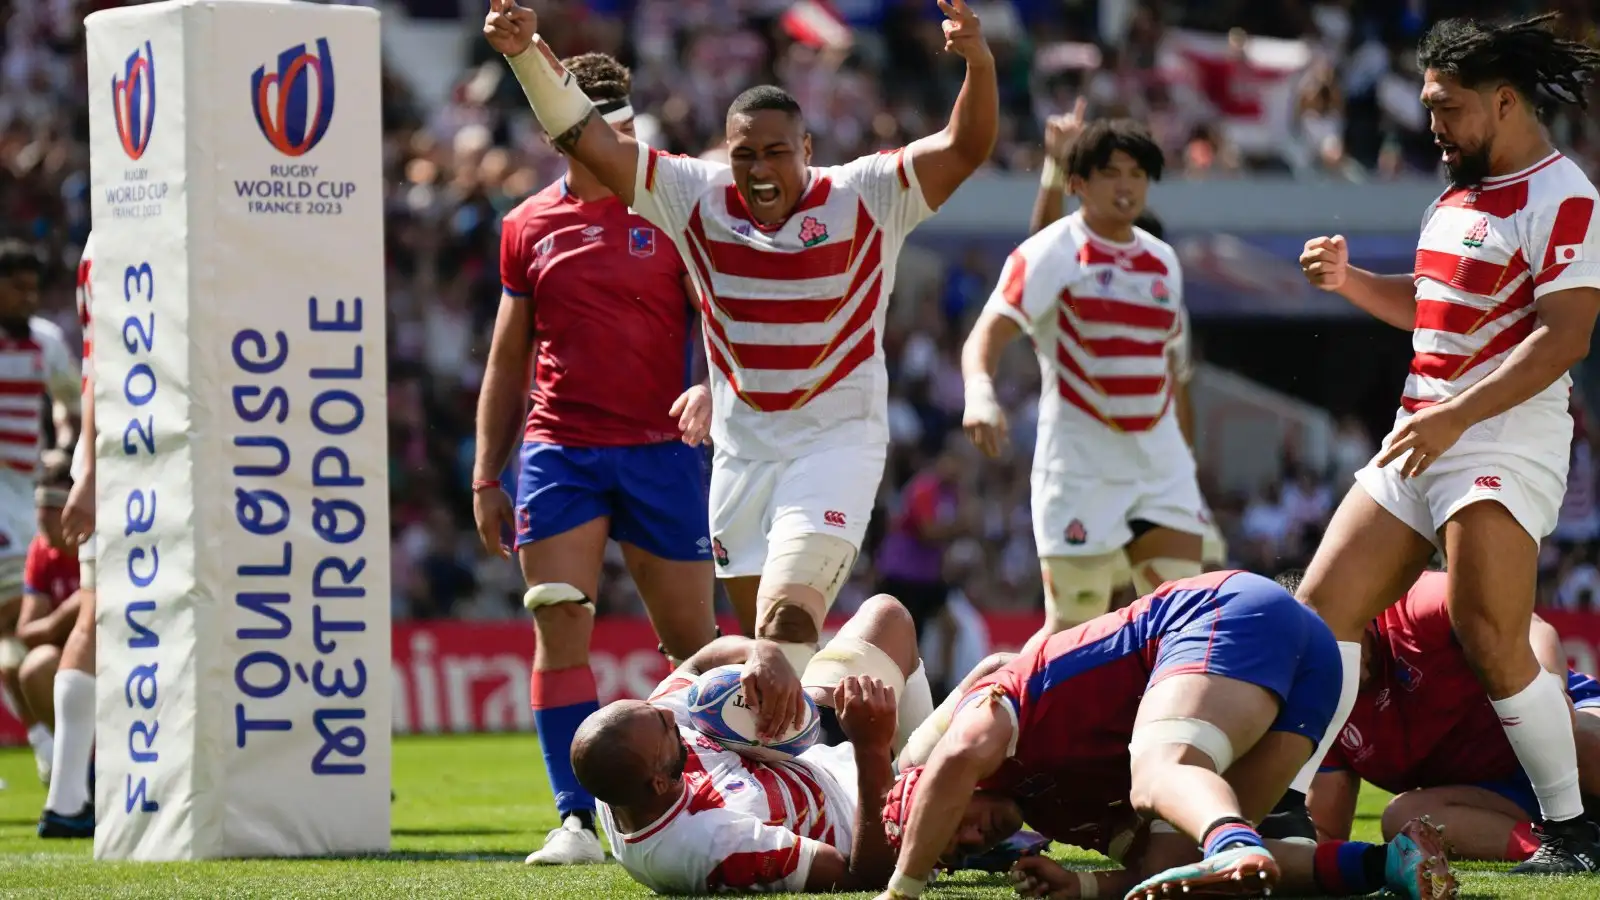 Japan players celebrate a try against Chile in the Rugby World Cup.